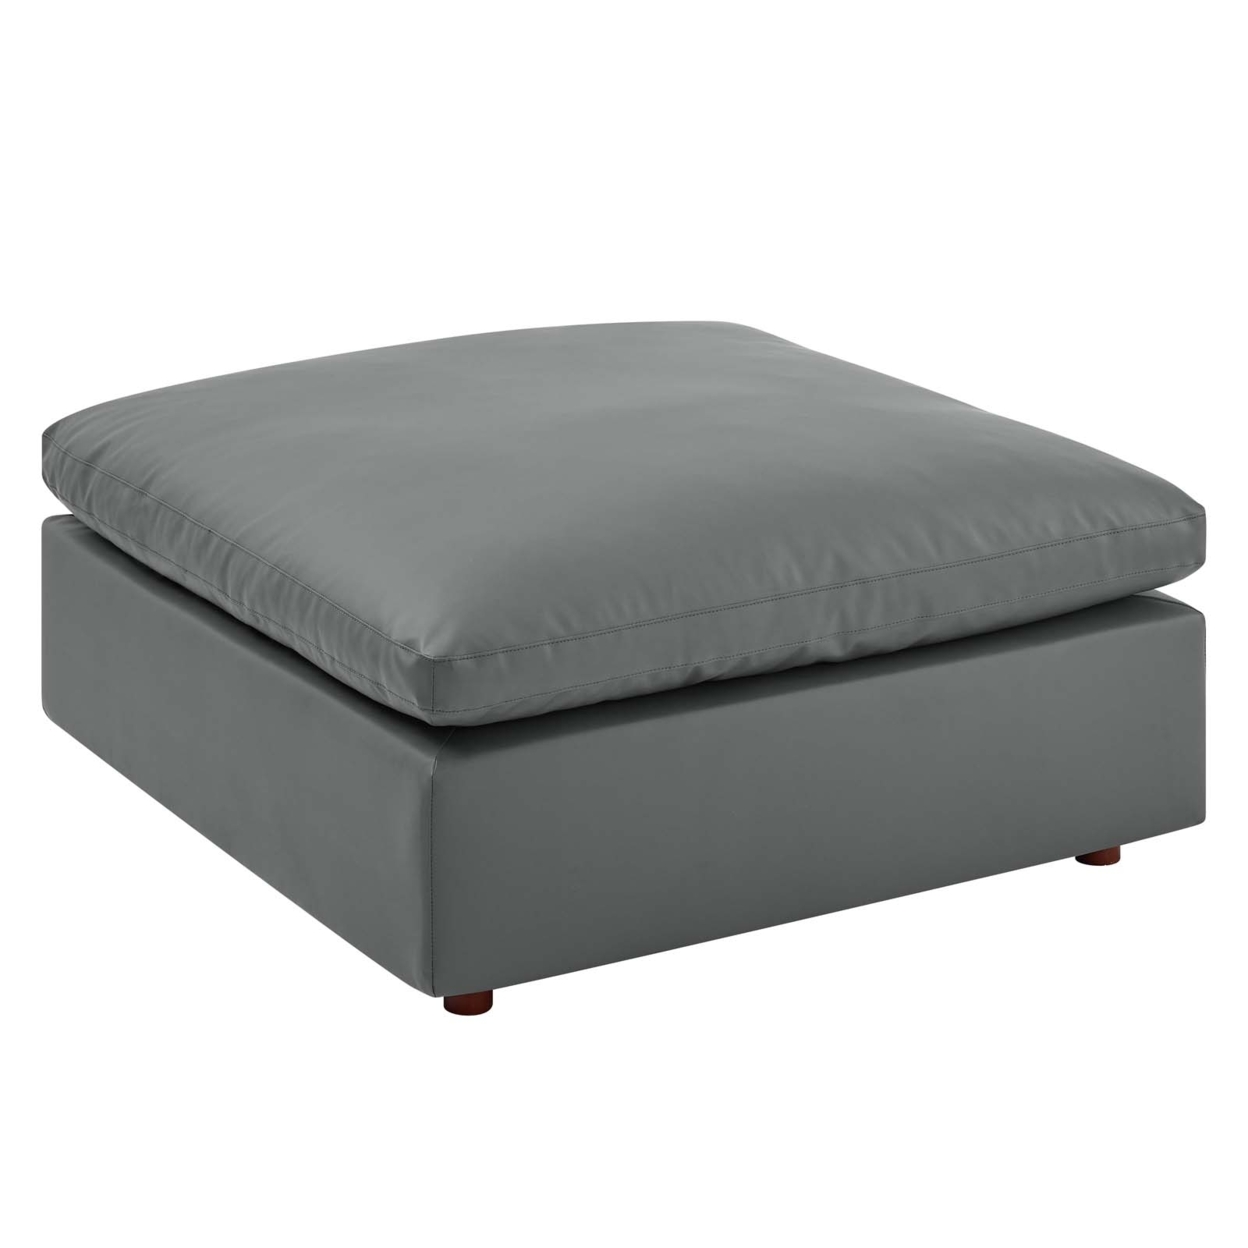 Commix Down Filled Overstuffed Vegan Leather Ottoman, Gray